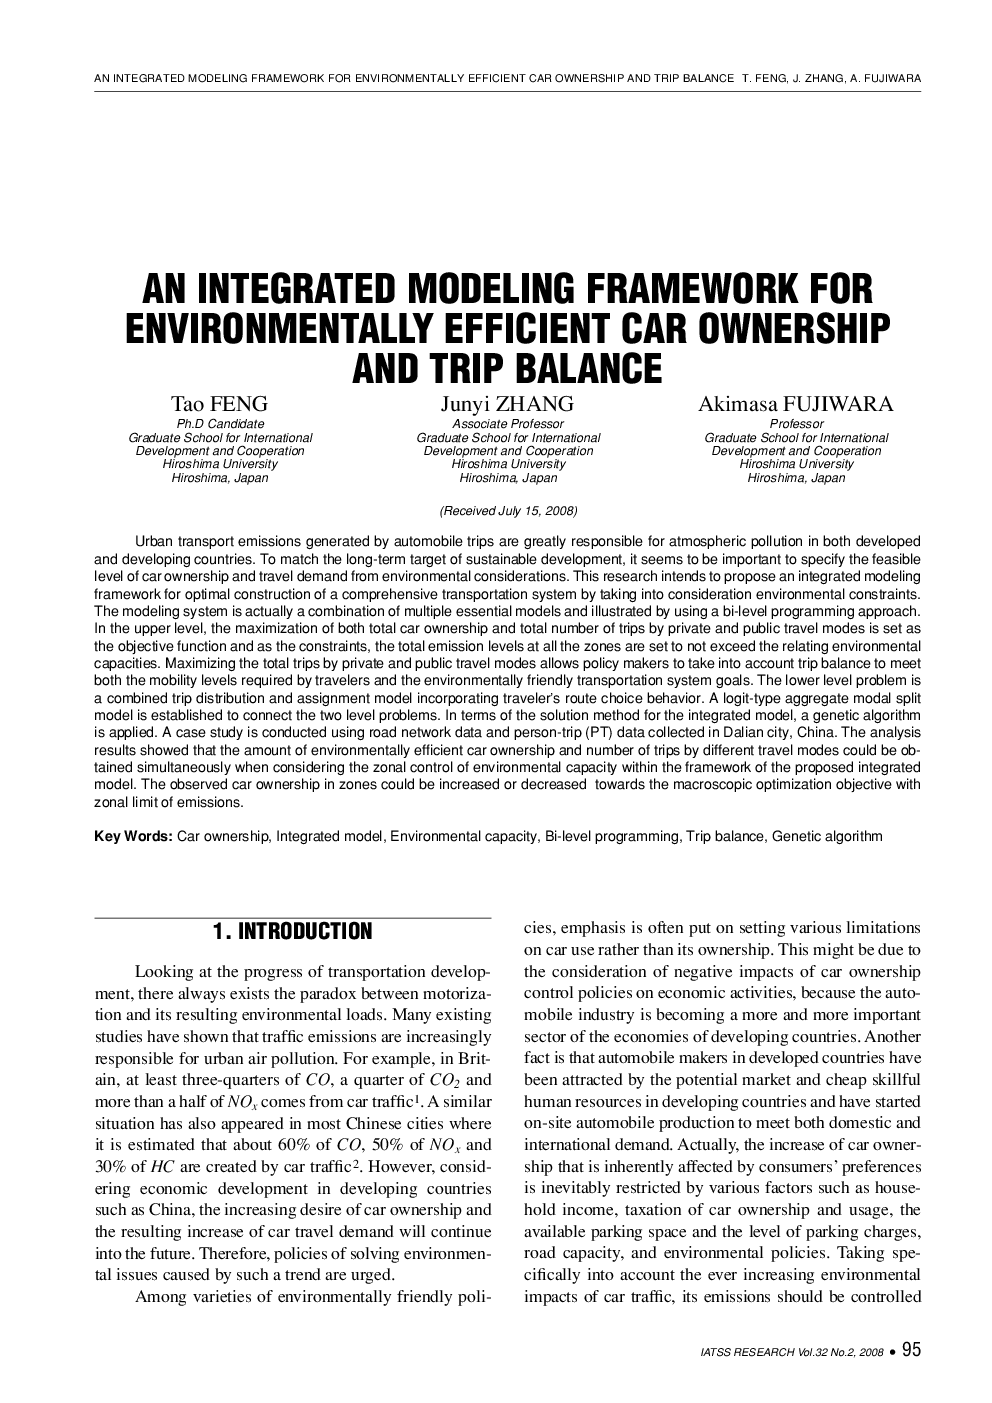 AN INTEGRATED MODELING FRAMEWORK FOR ENVIRONMENTALLY EFFICIENT CAR OWNERSHIP AND TRIP BALANCE